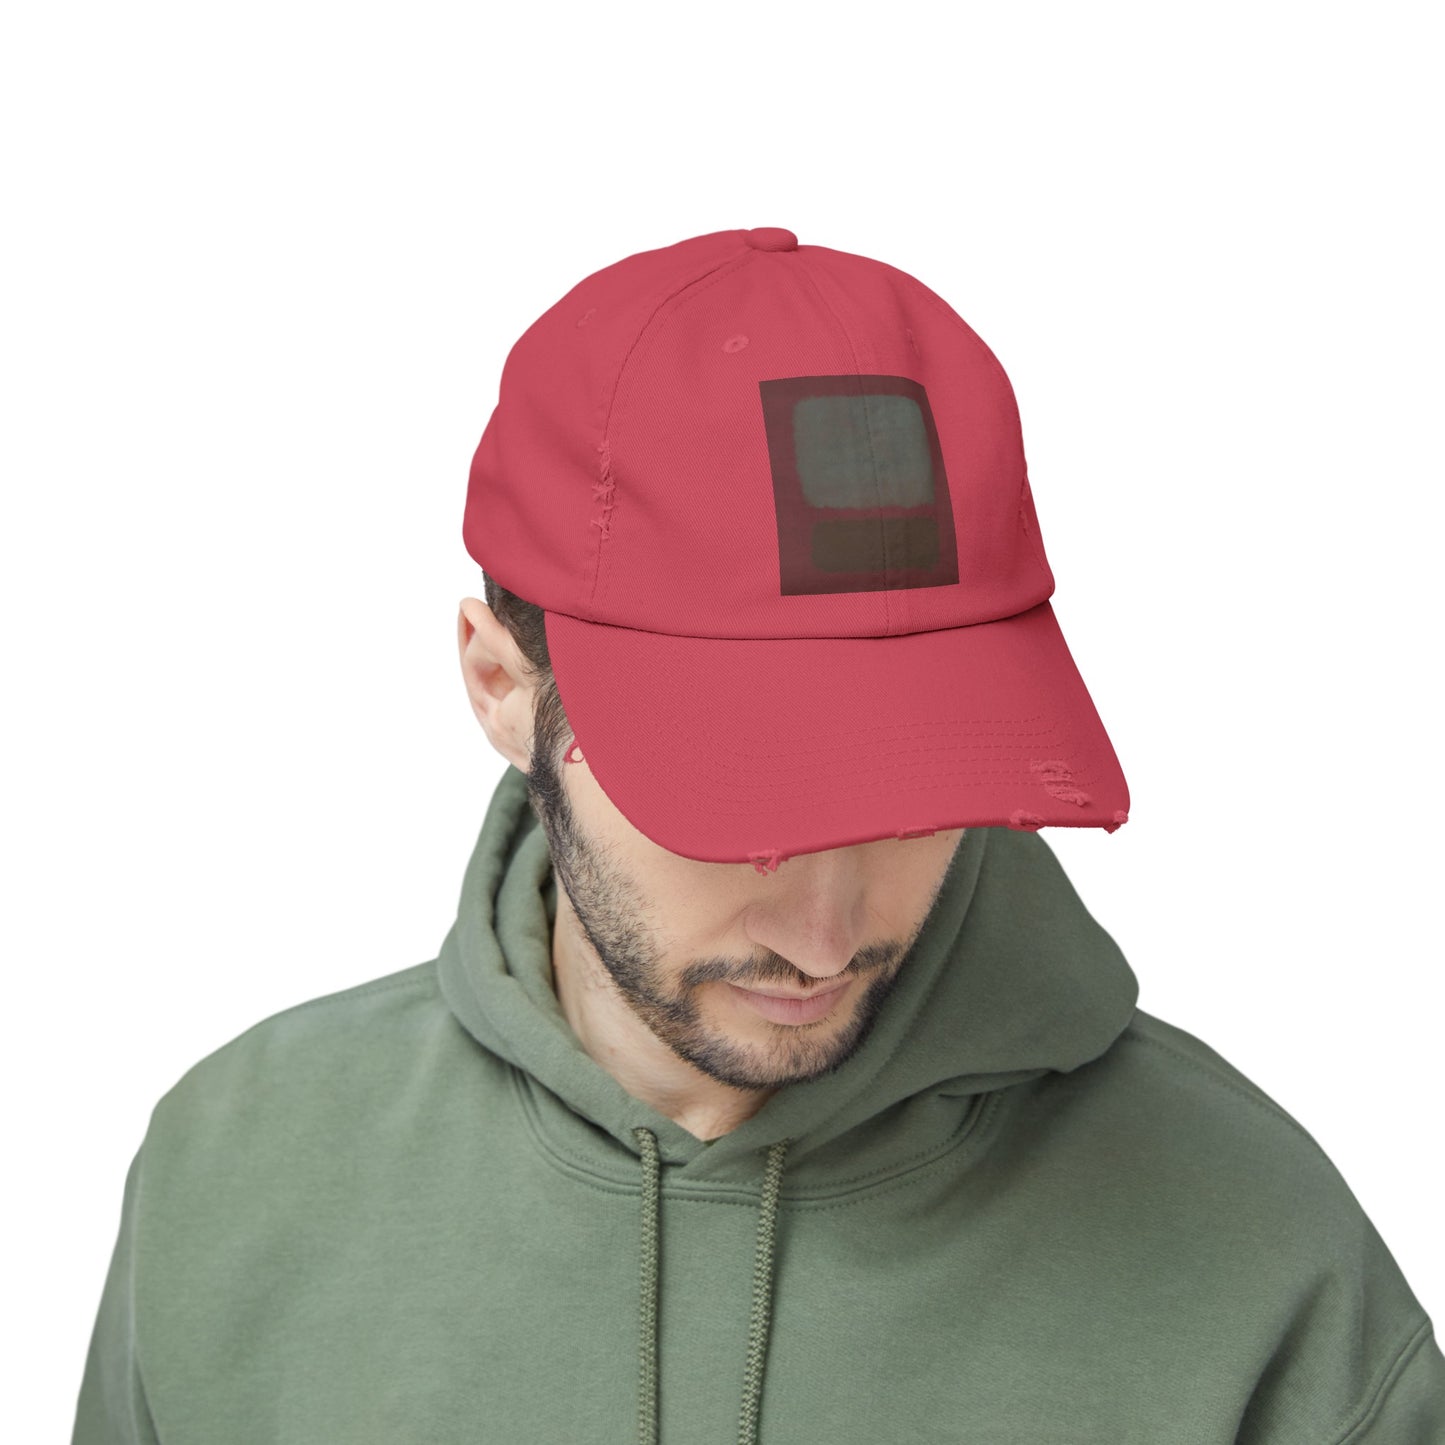 a man wearing a red hat and a green hoodie